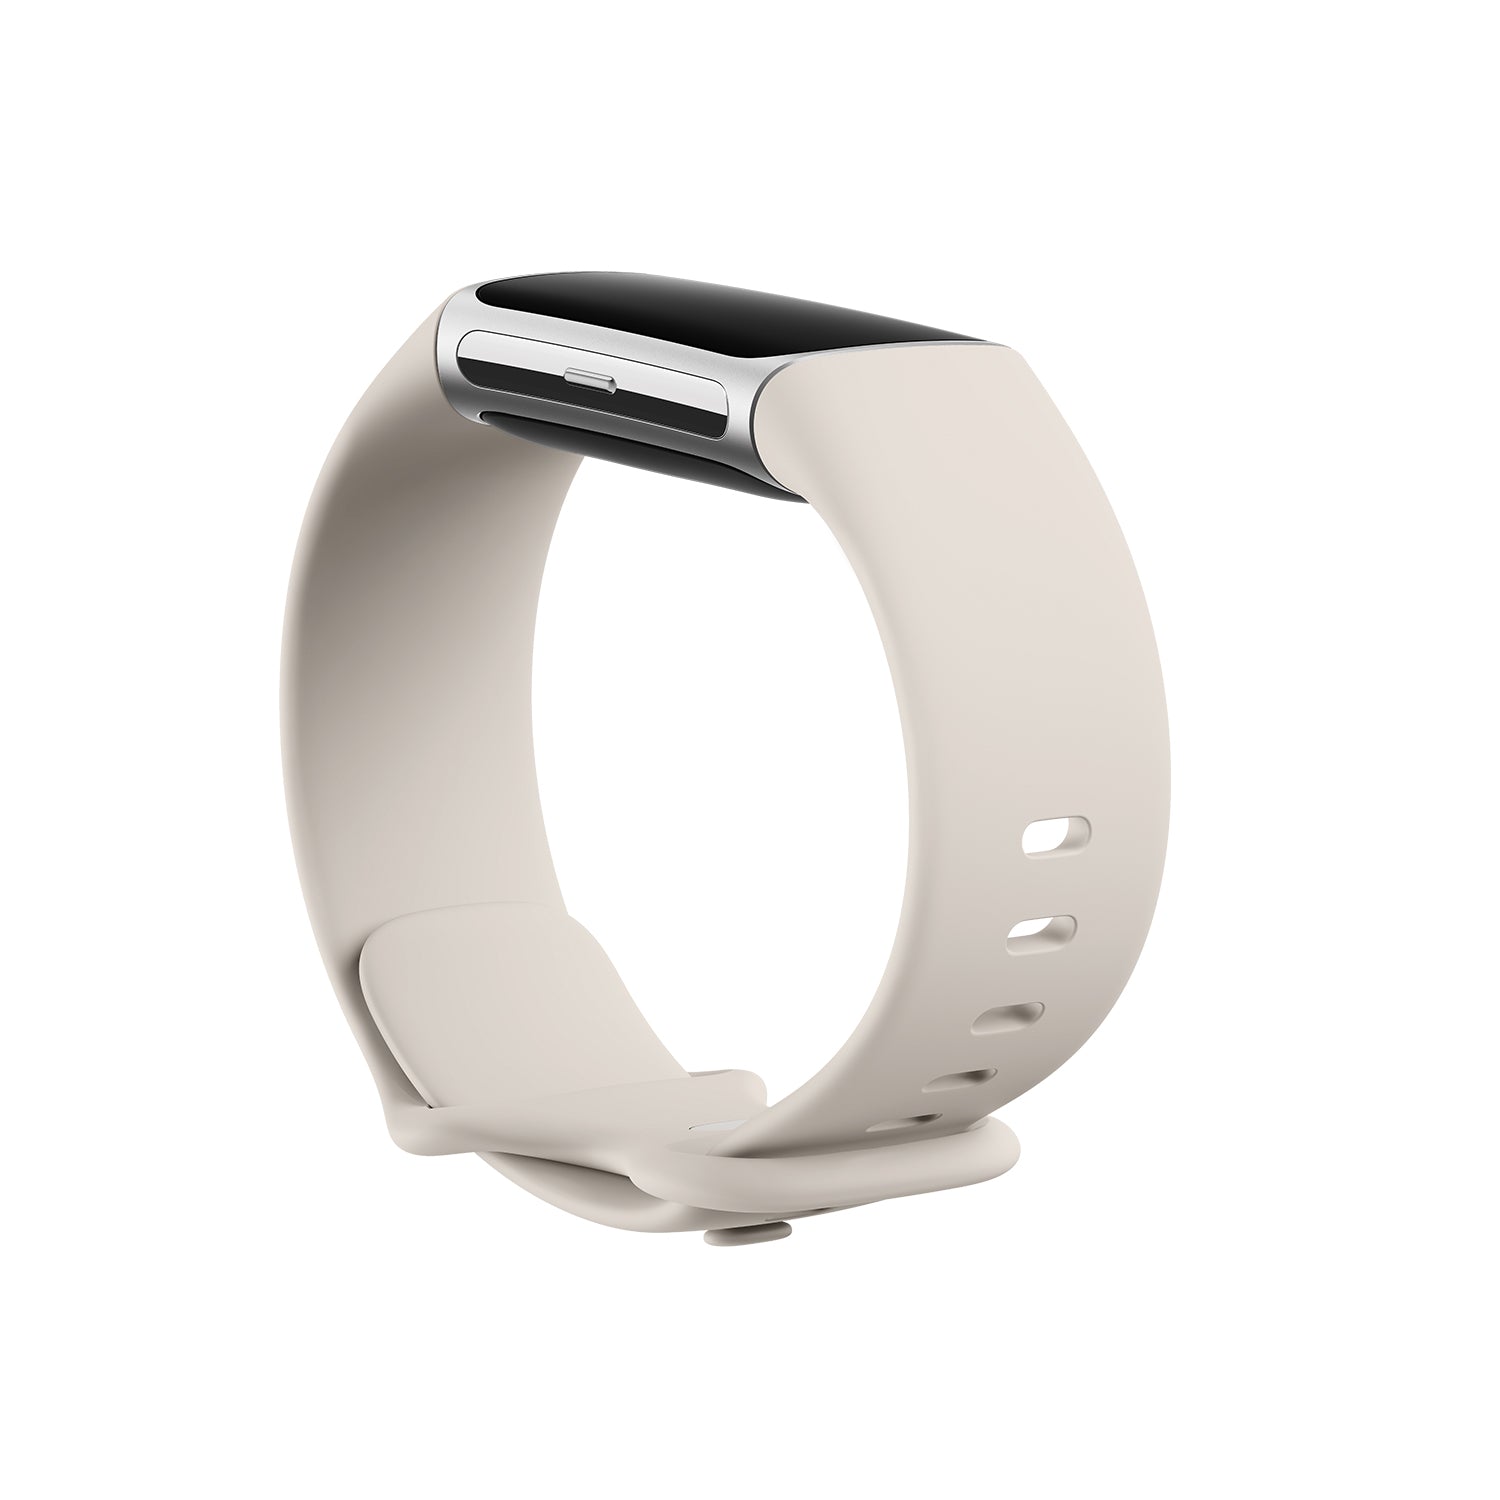 Fitbit Charge 6 Advanced Fitness & Health Tracker